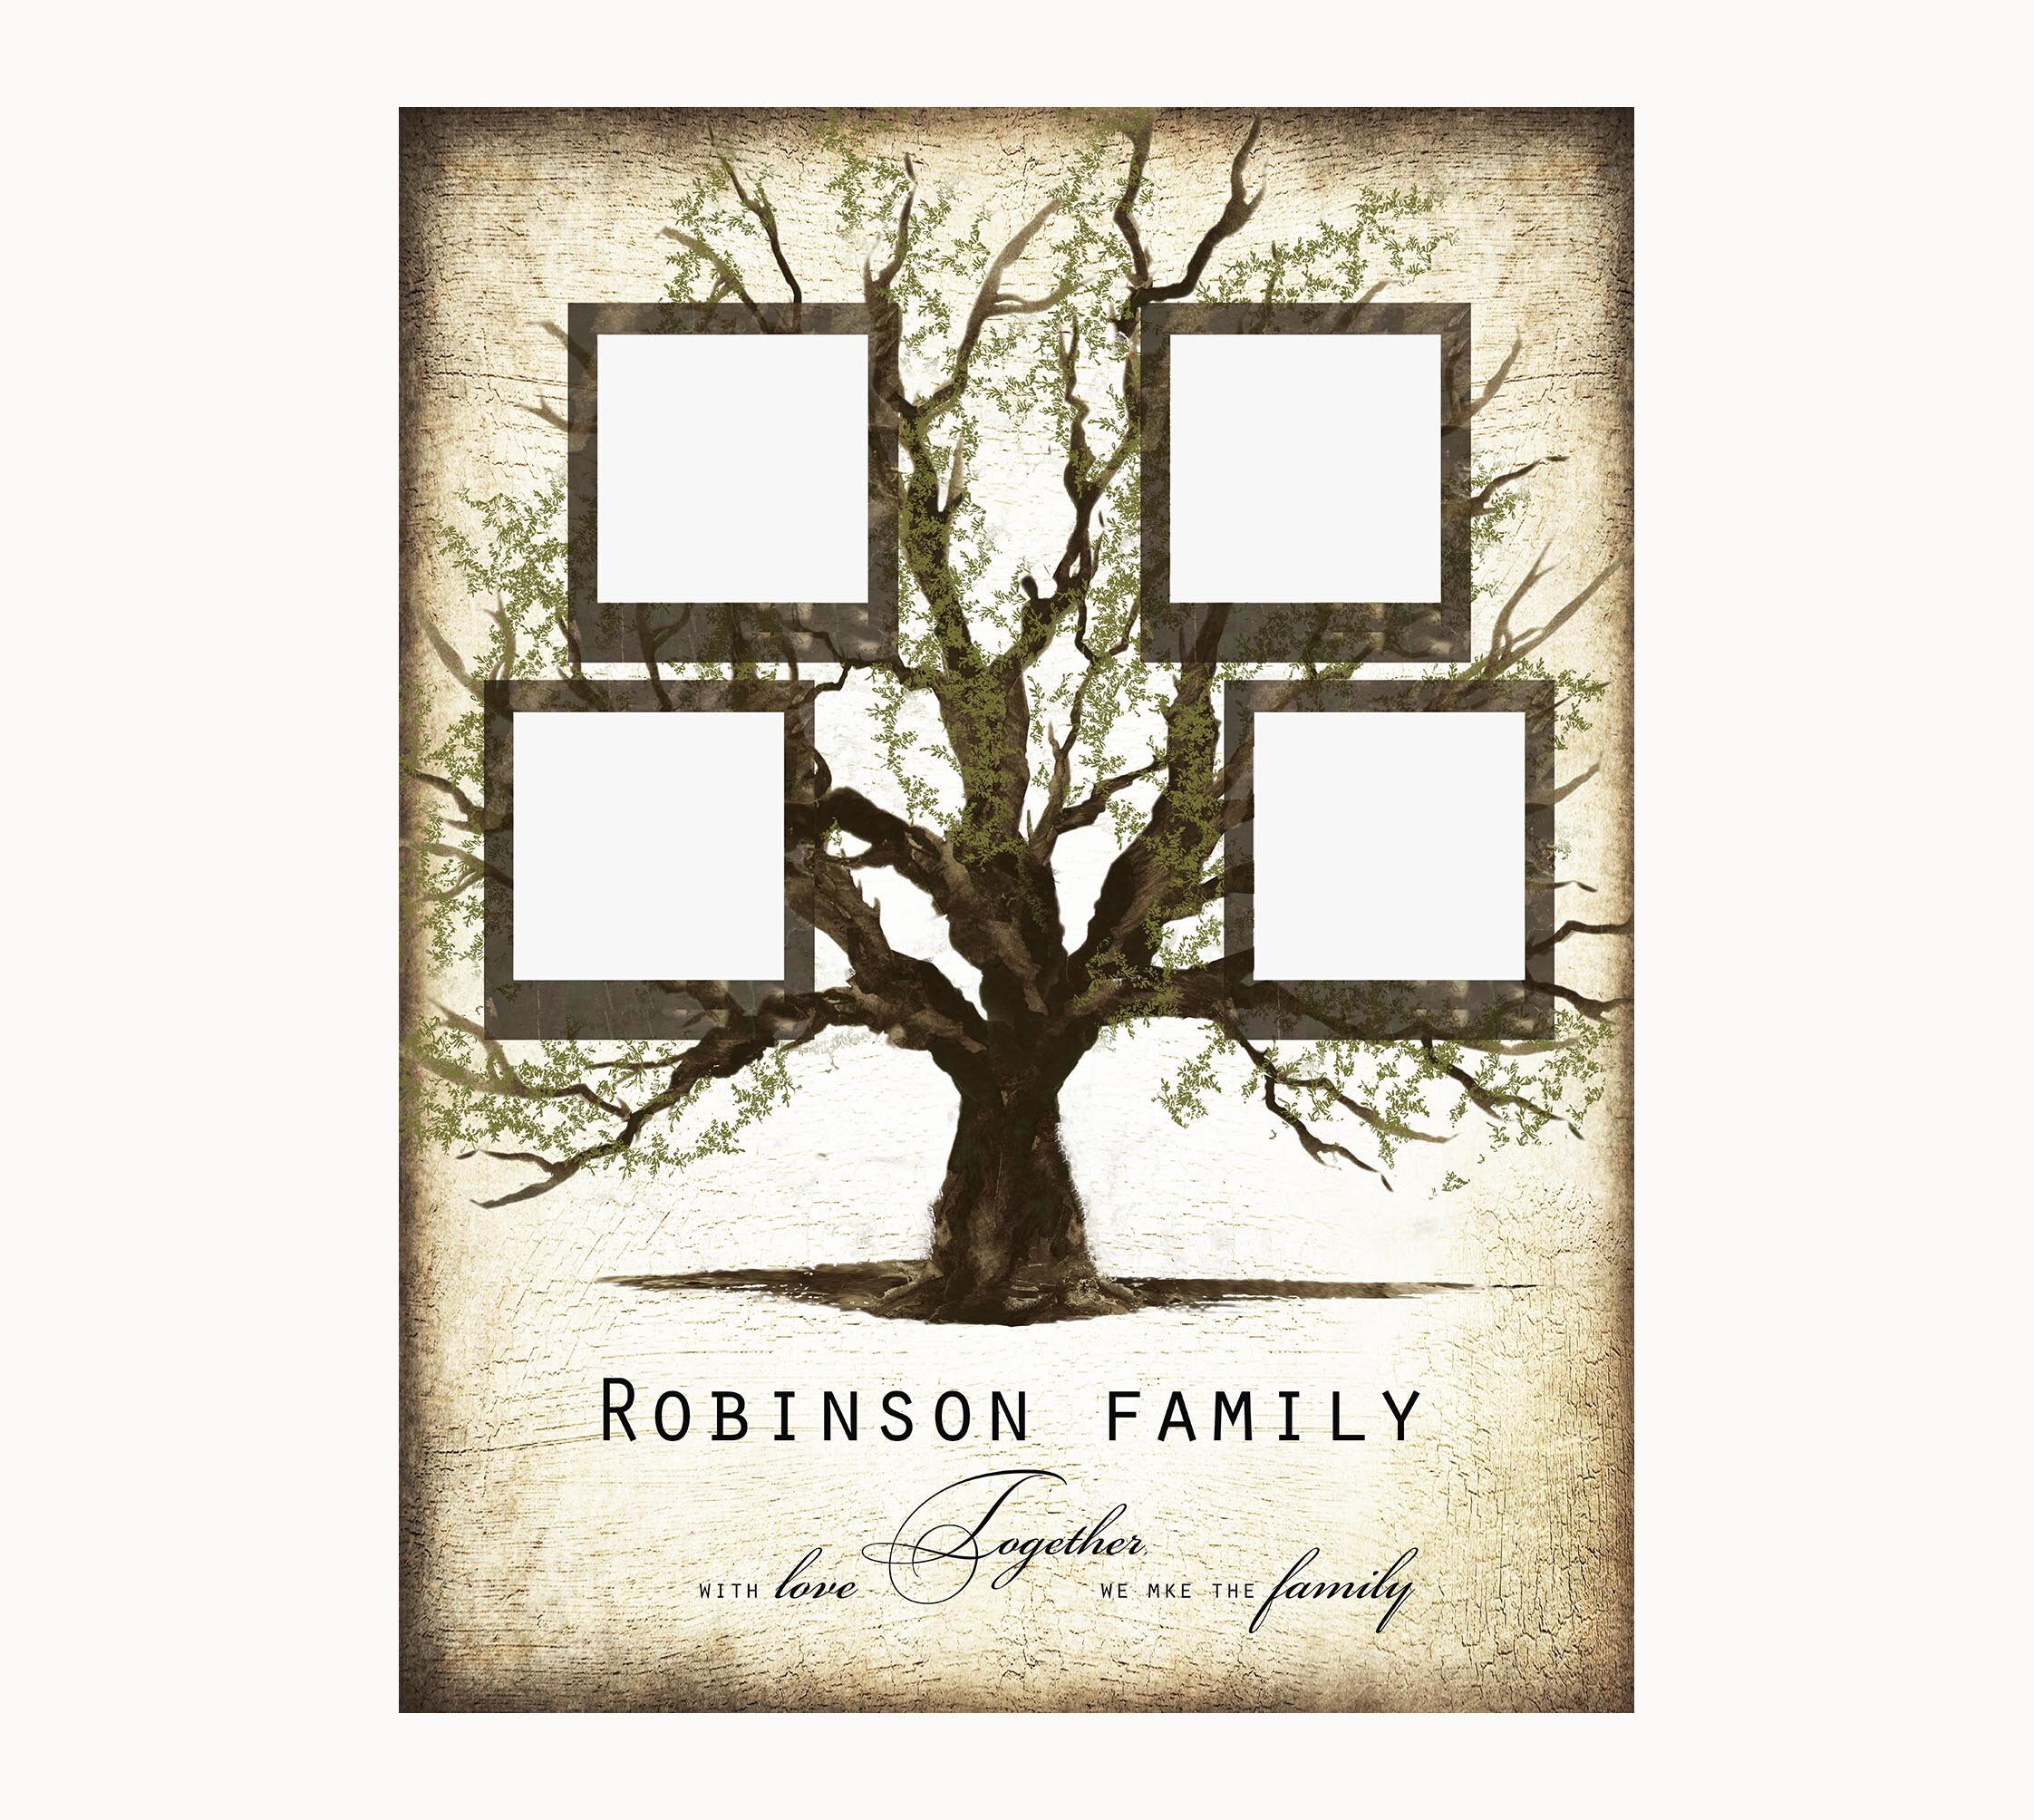 Mother's Day Family Tree Stencil